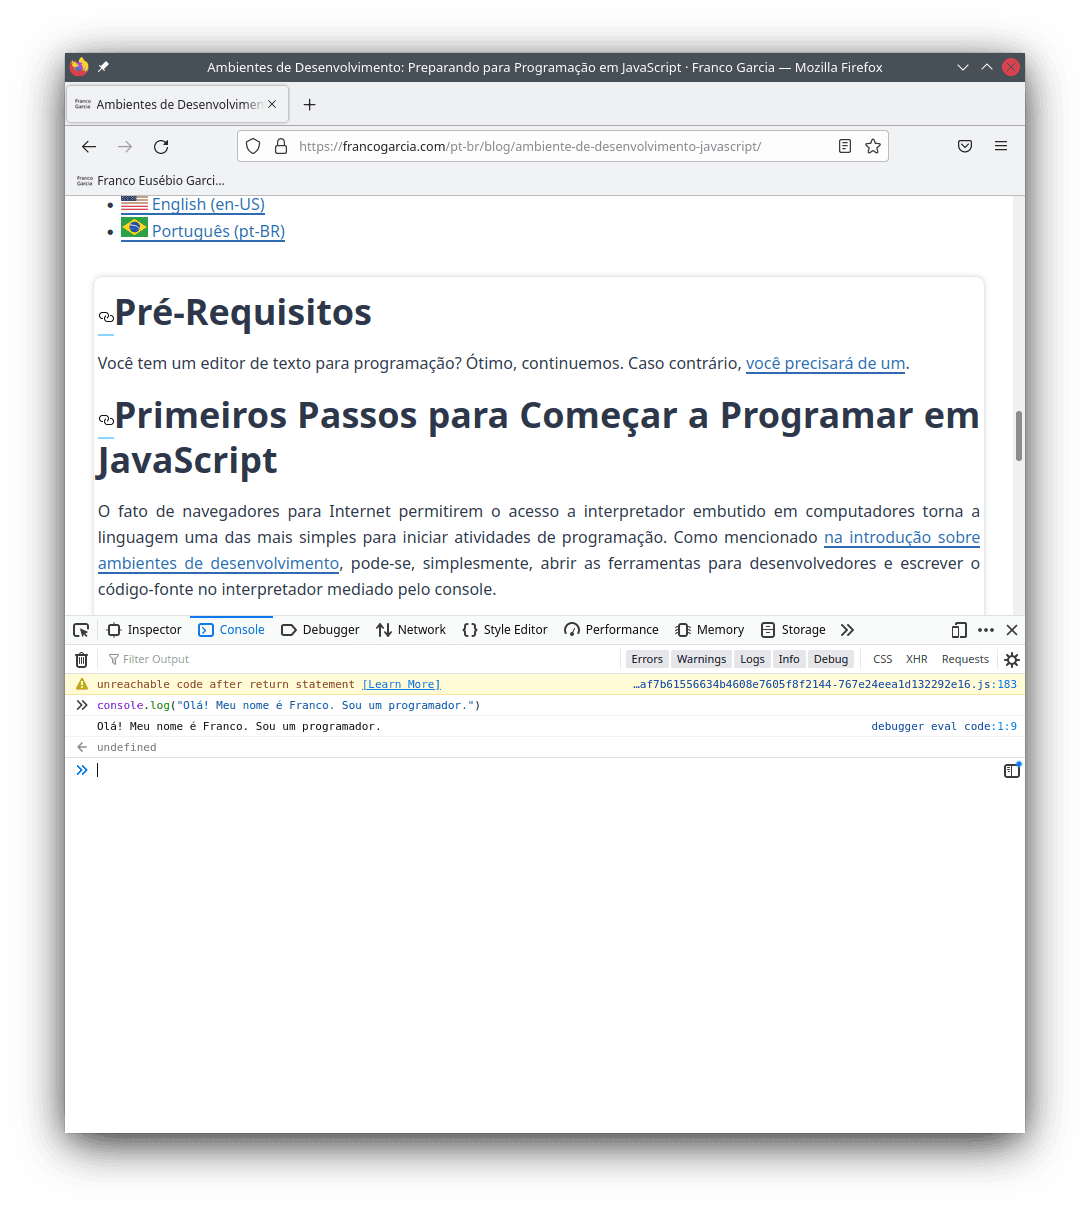 An example of using the JavaScript interpreted embedded in Firefox. The `console.log()` line writes a text message to the console. In this case, the line `console.log("Olá! Meu nome é Franco. Sou um programador.")` will result into "Olá! Meu nome é Franco. Sou um programador."